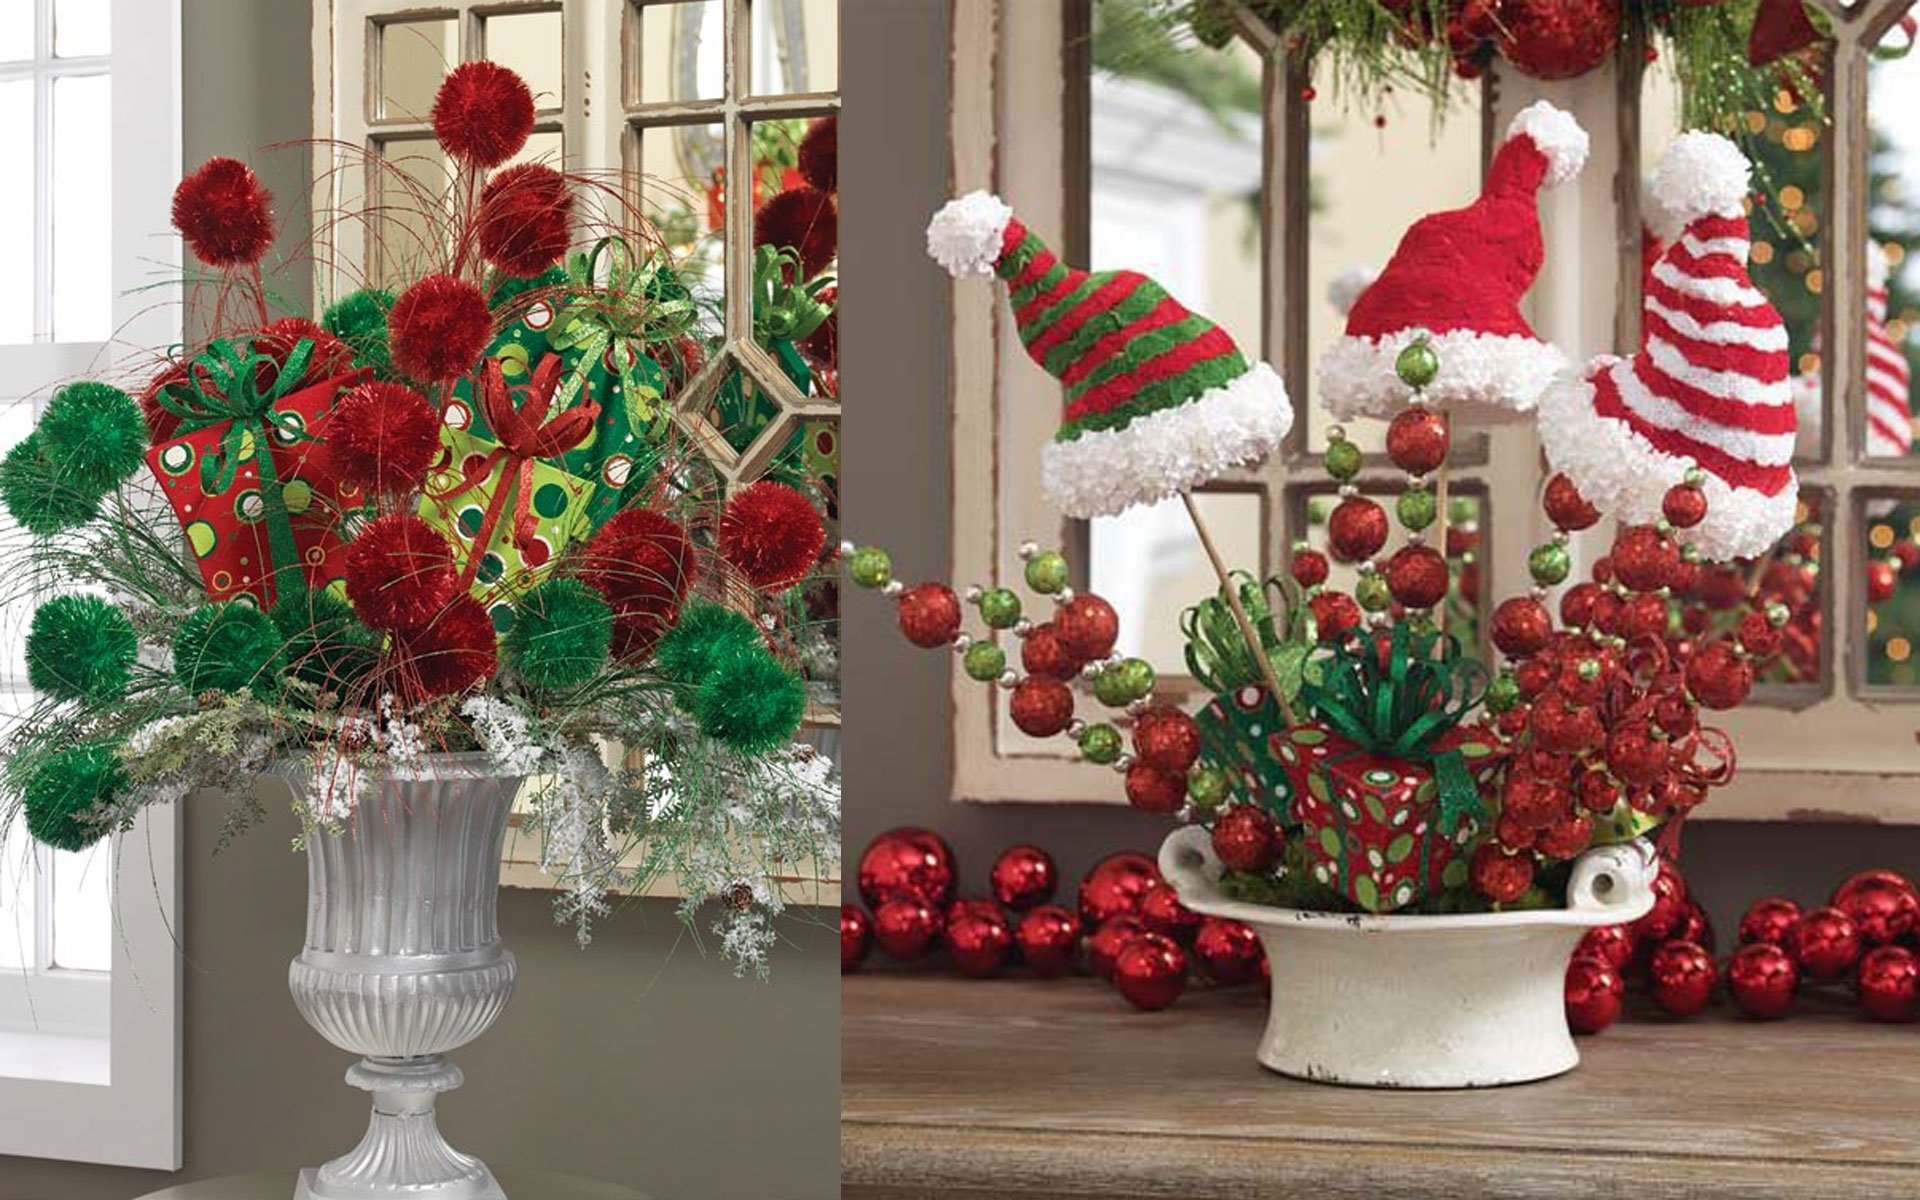 10 Perfect Decorating Ideas For Christmas 2013 christmas decoration ideas lifepopper holiday happy mood dma homes 1 2022